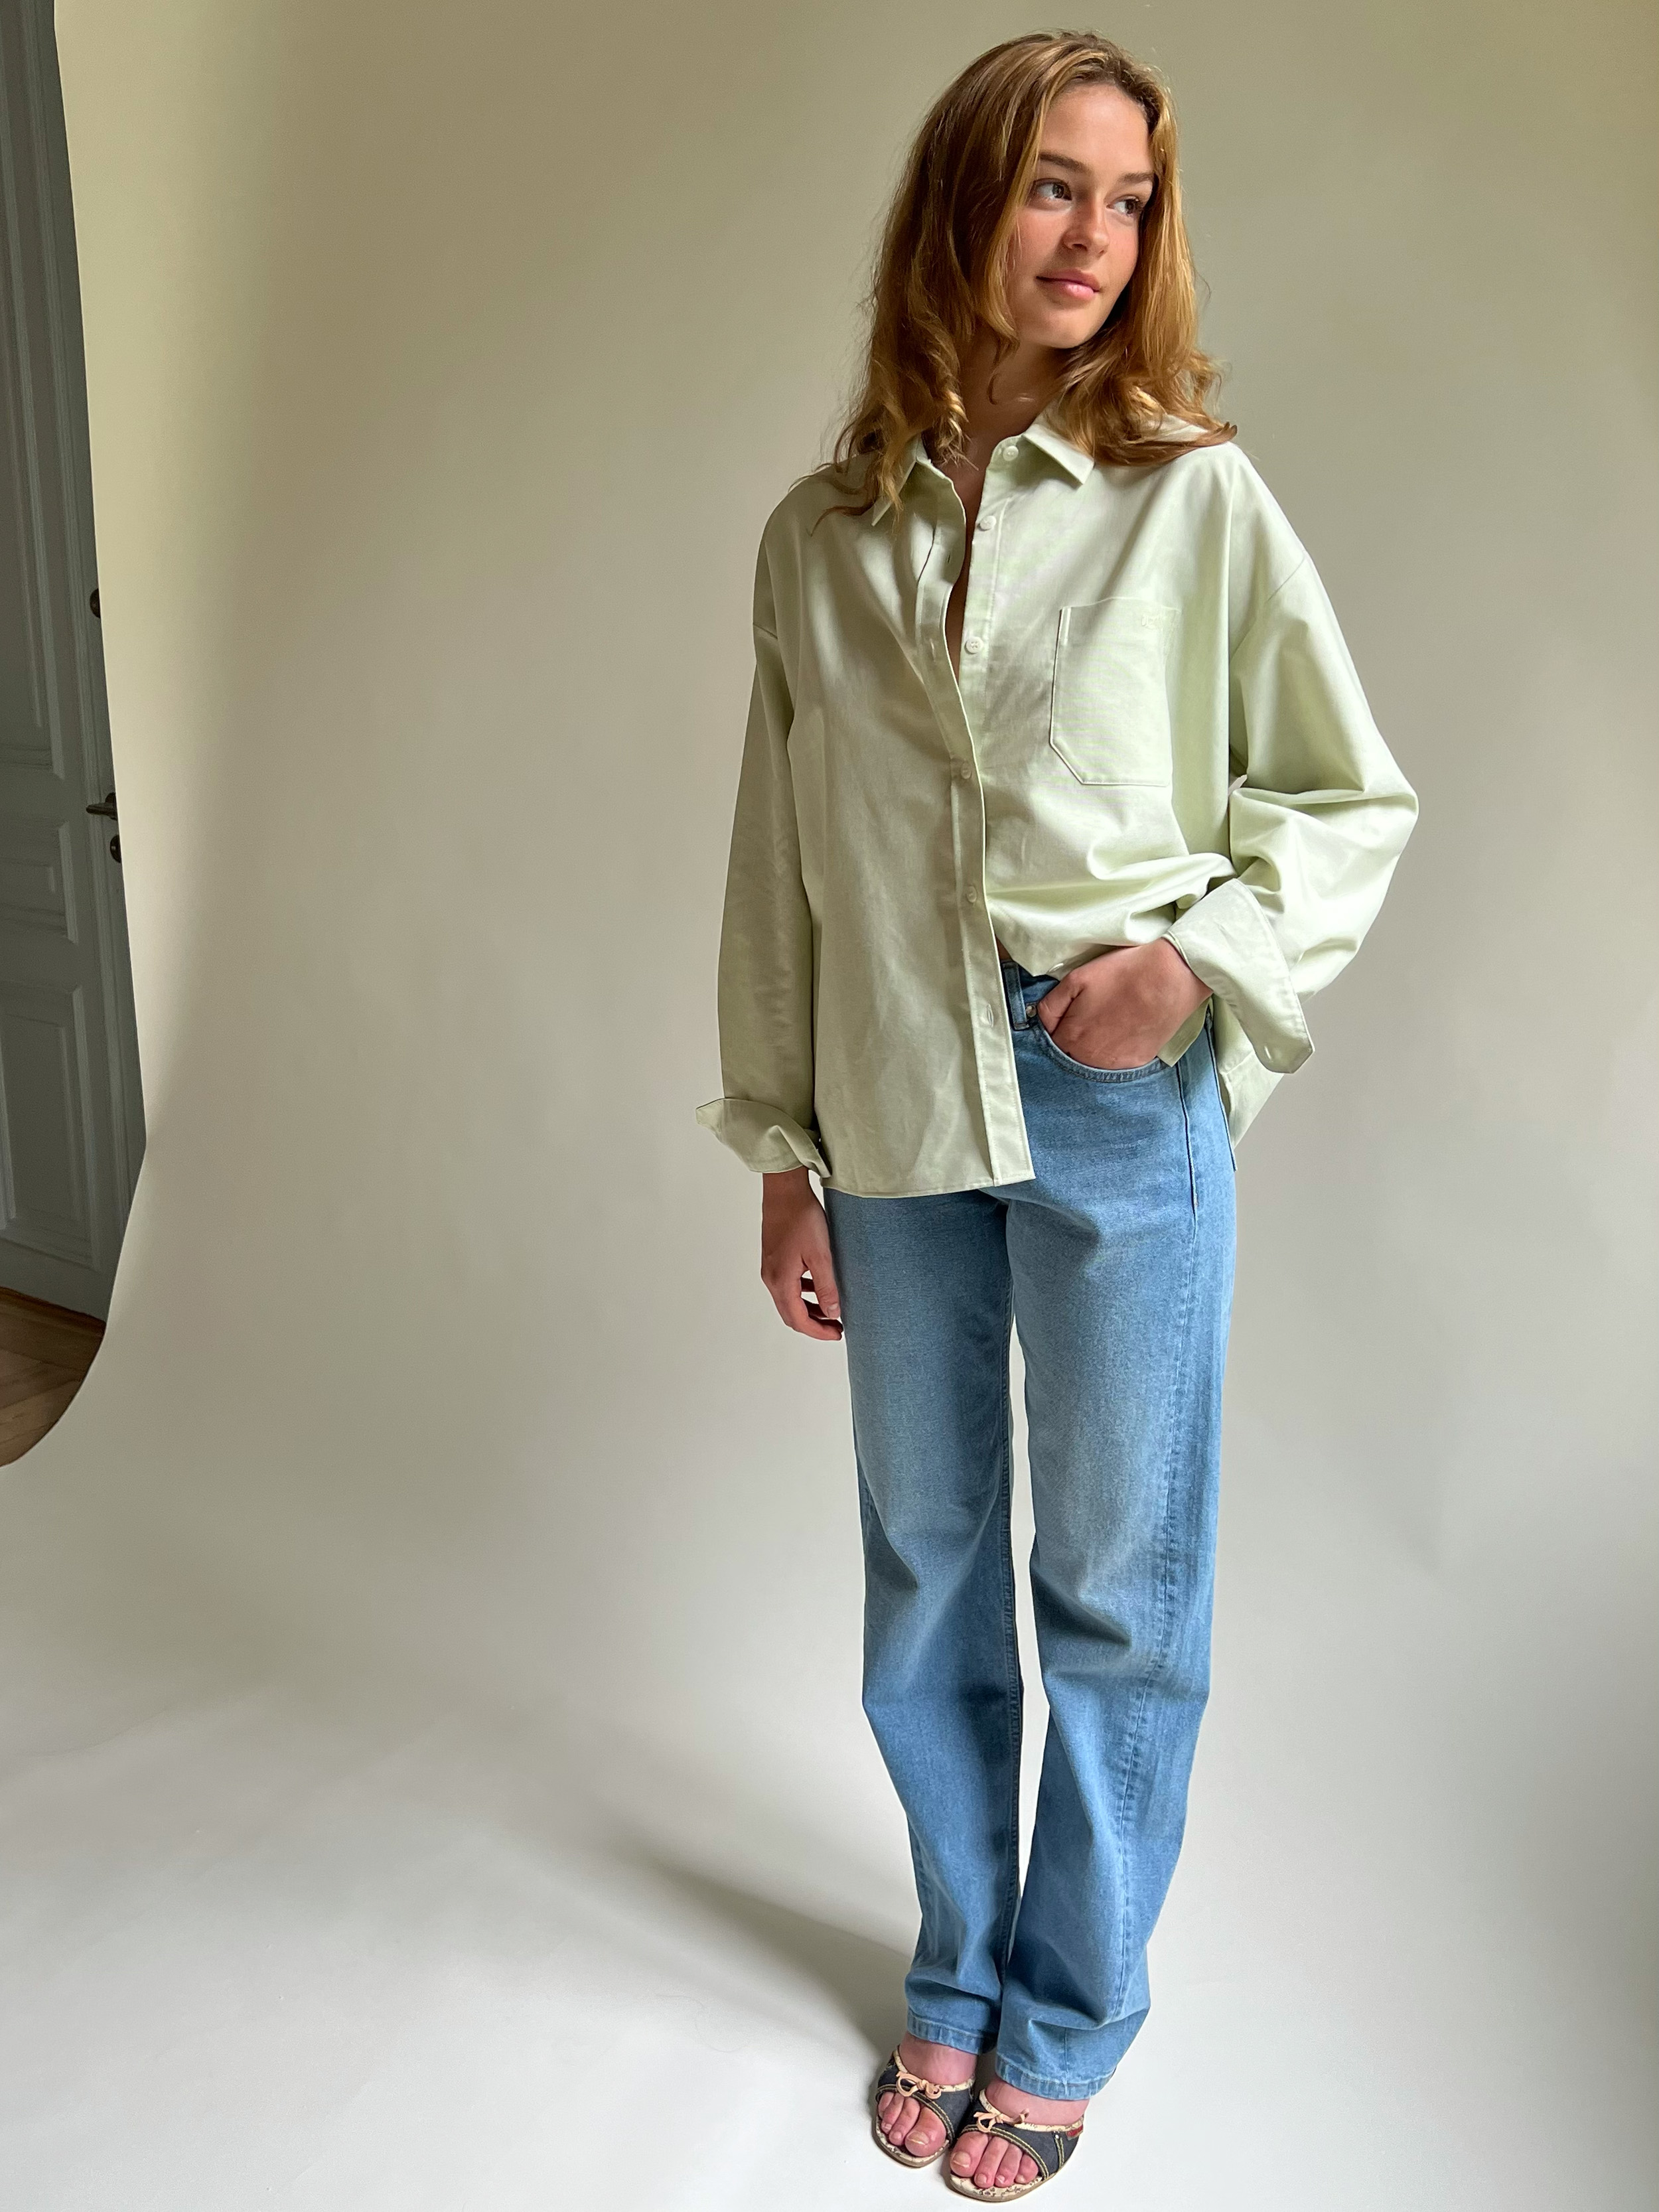 A Vintage Inspired Look with Oversized Blazer + Straight Leg Jeans - Jeans  and a Teacup